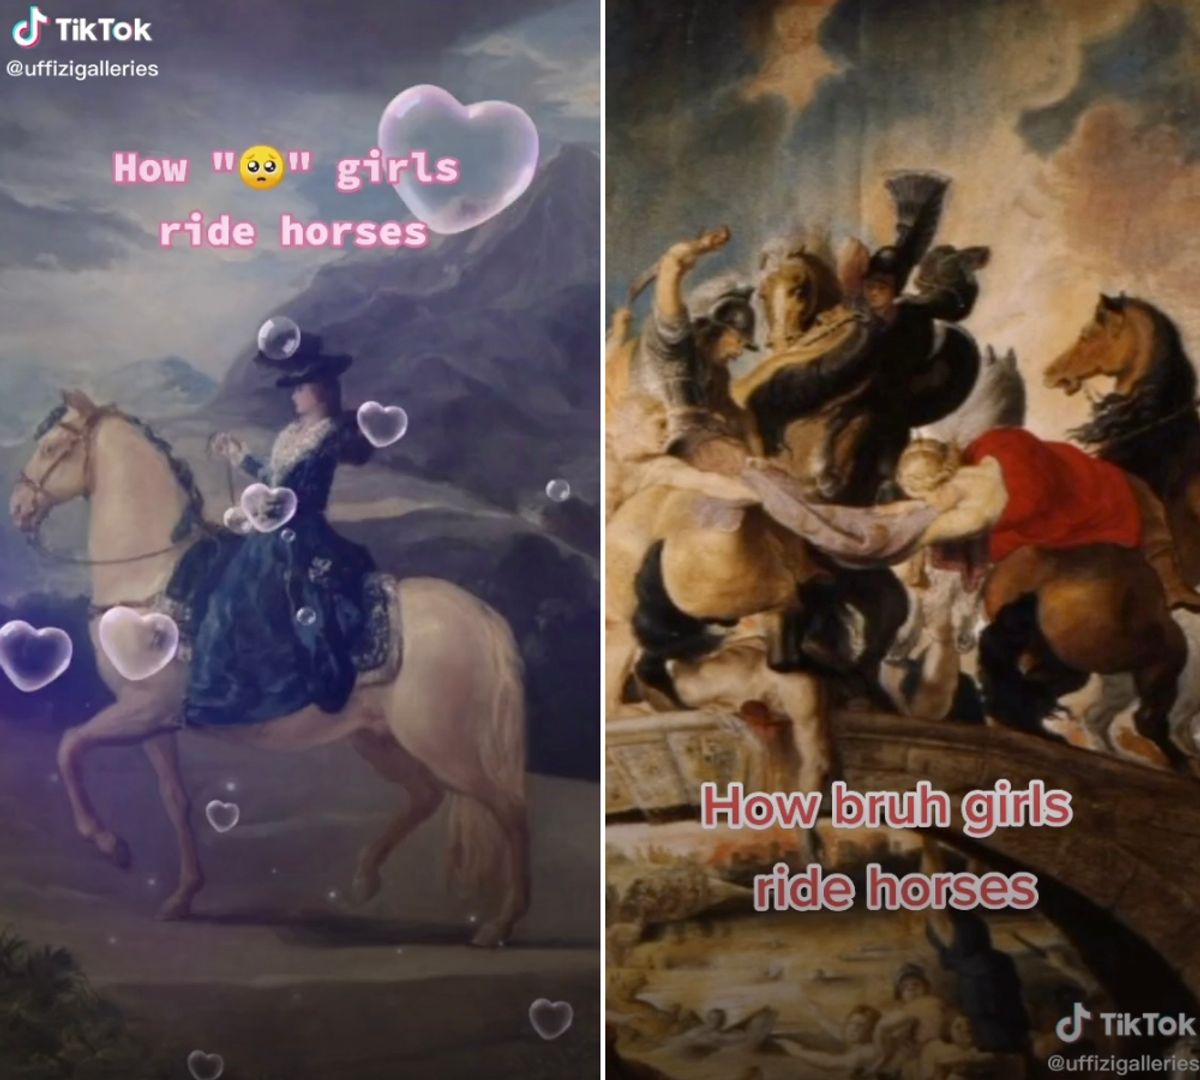 The museum’s irreverent content on TikTok has garnered especial media attention 